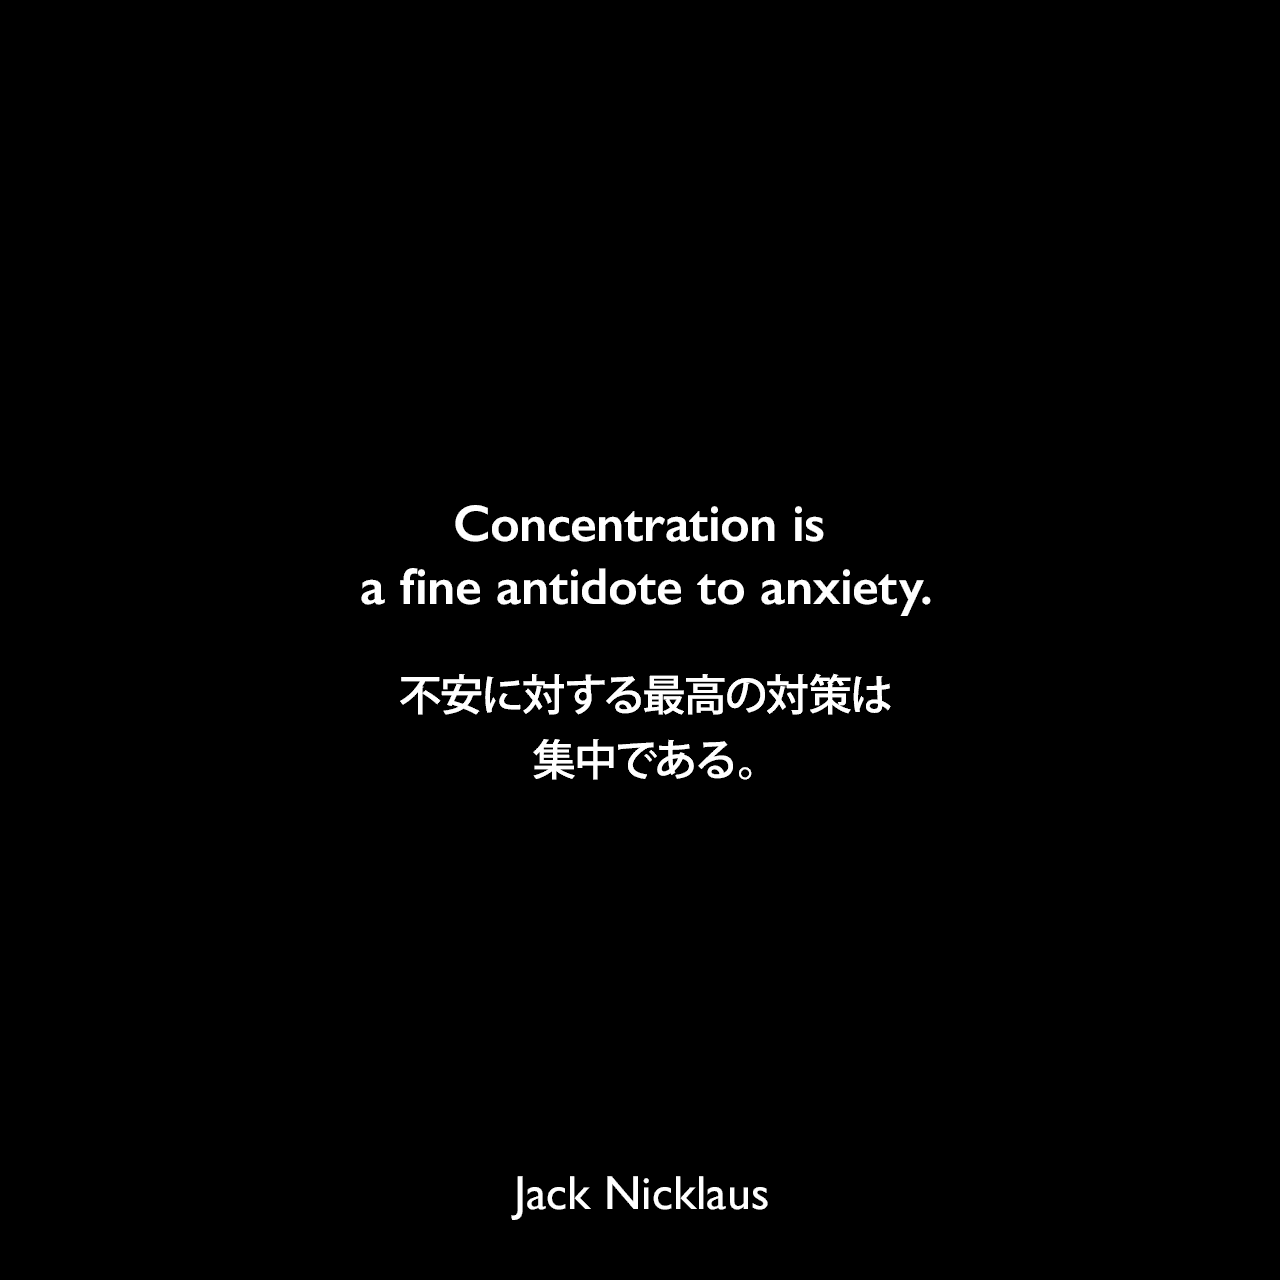 Concentration is a fine antidote to anxiety.不安に対する最高の対策は、集中である。Jack Nicklaus